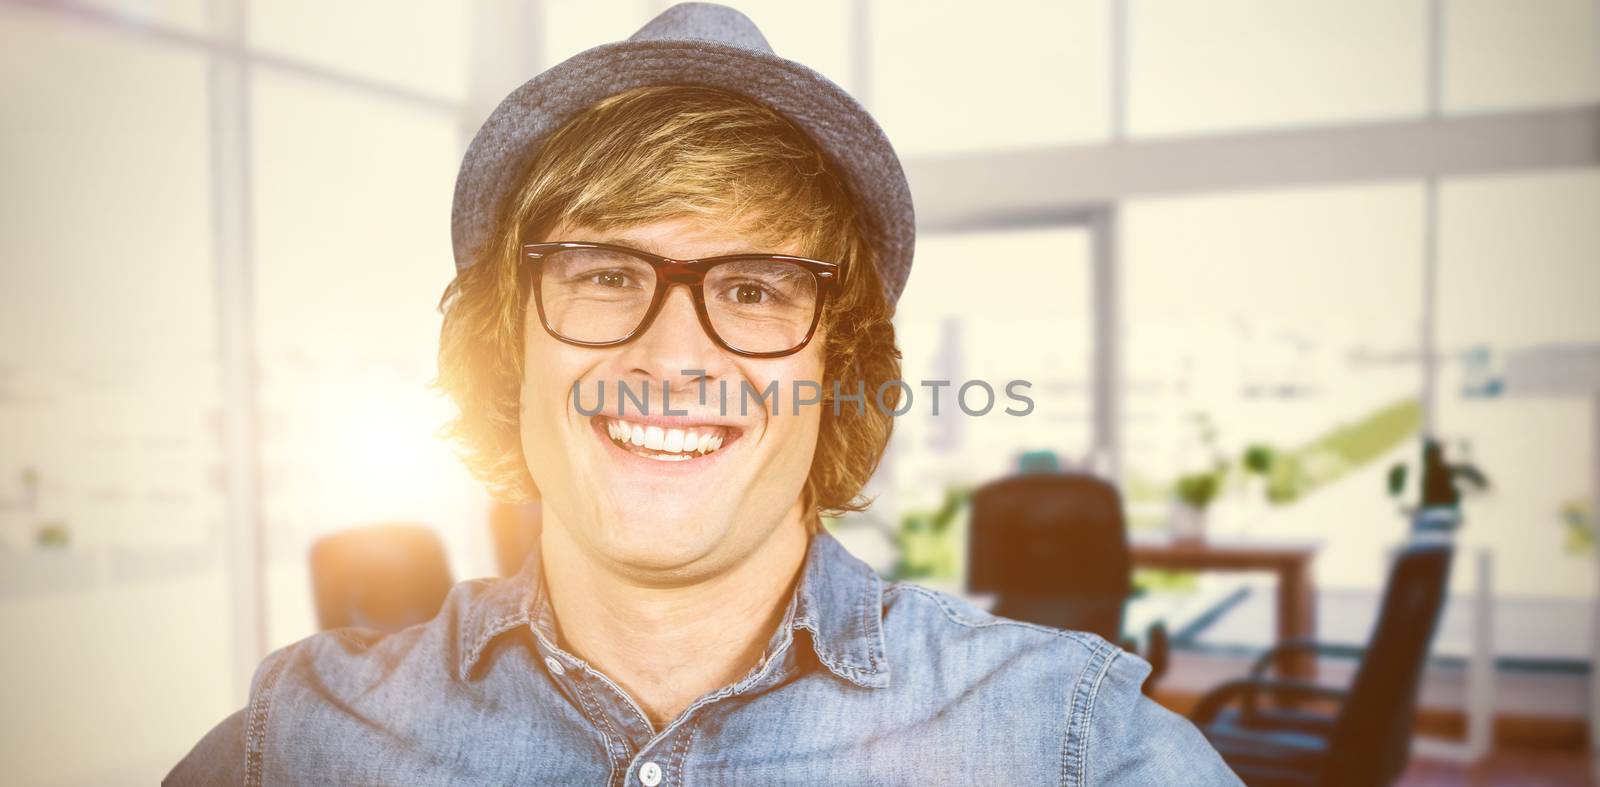 Smiling blond hipster staring at camera against board room